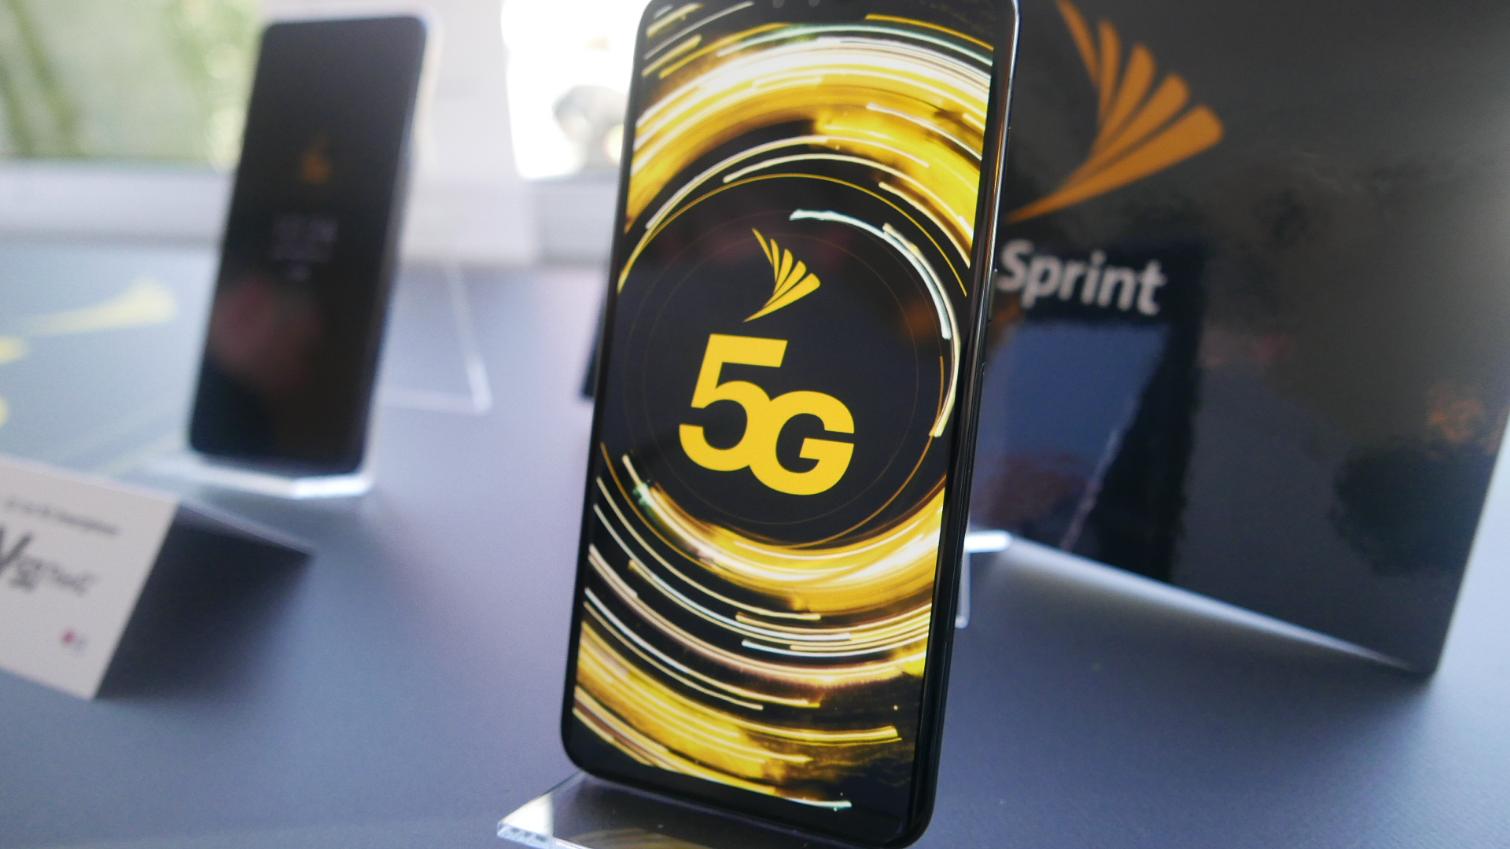 Sprint Lights Up 5G Network: What You Need to Know